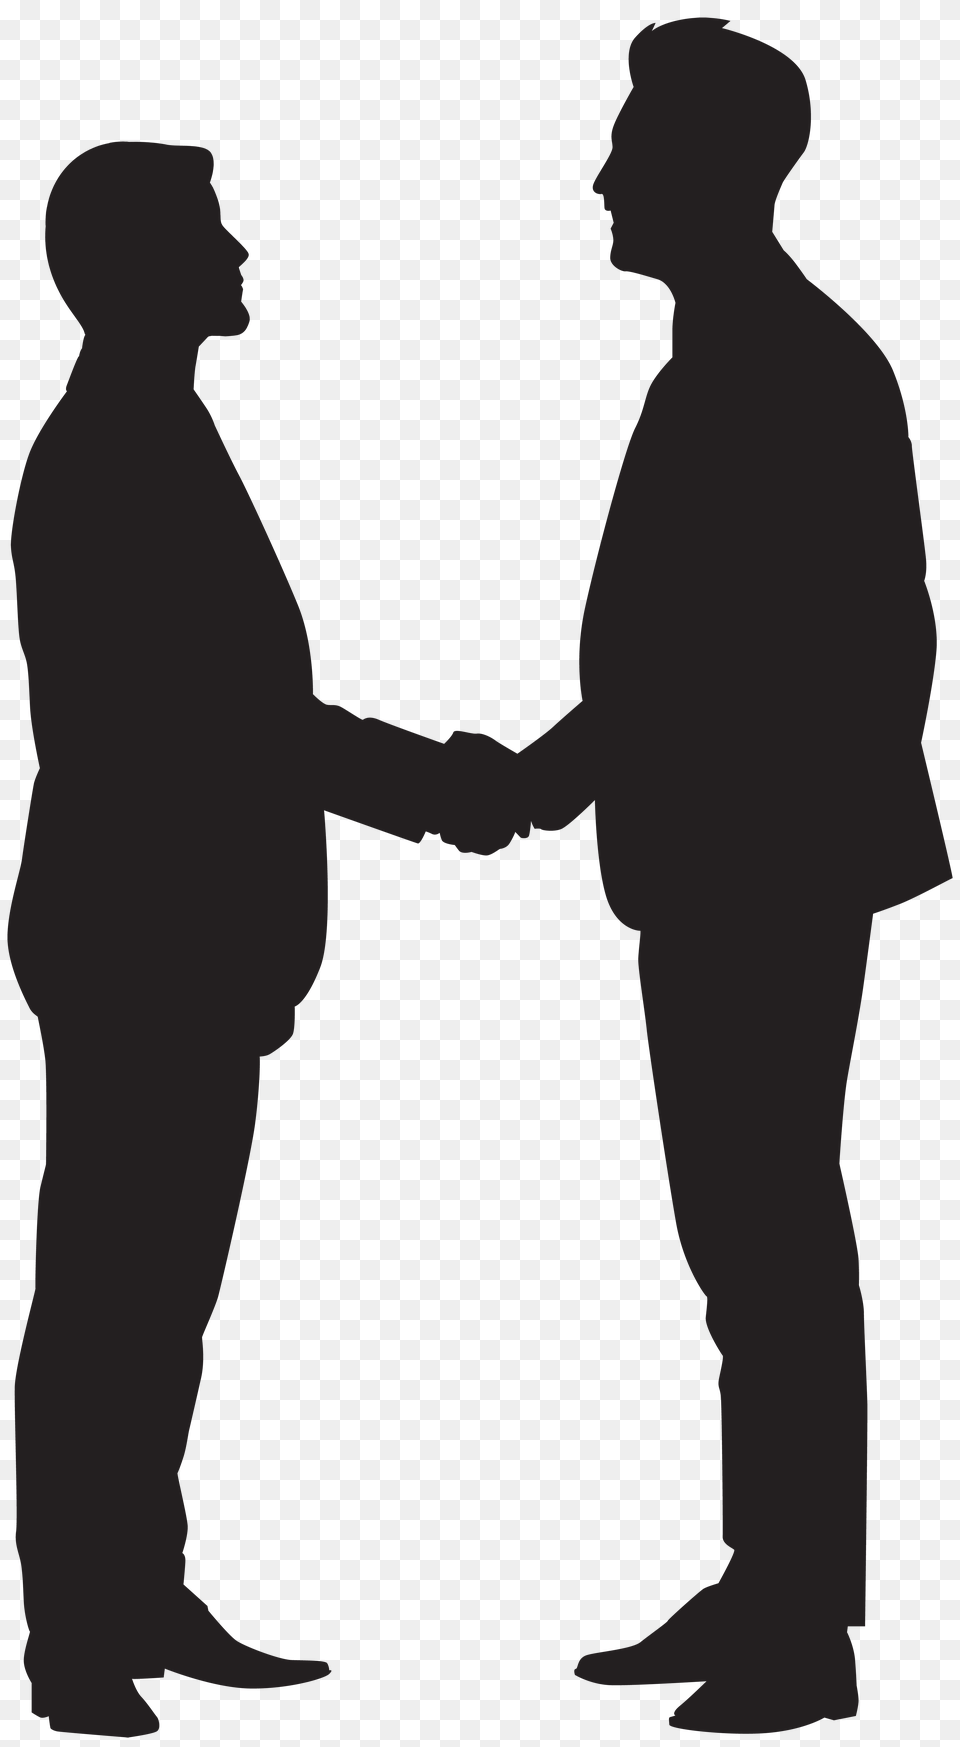 Men Shaking Hands Silhouette Clip Art Gallery, Text Free Png